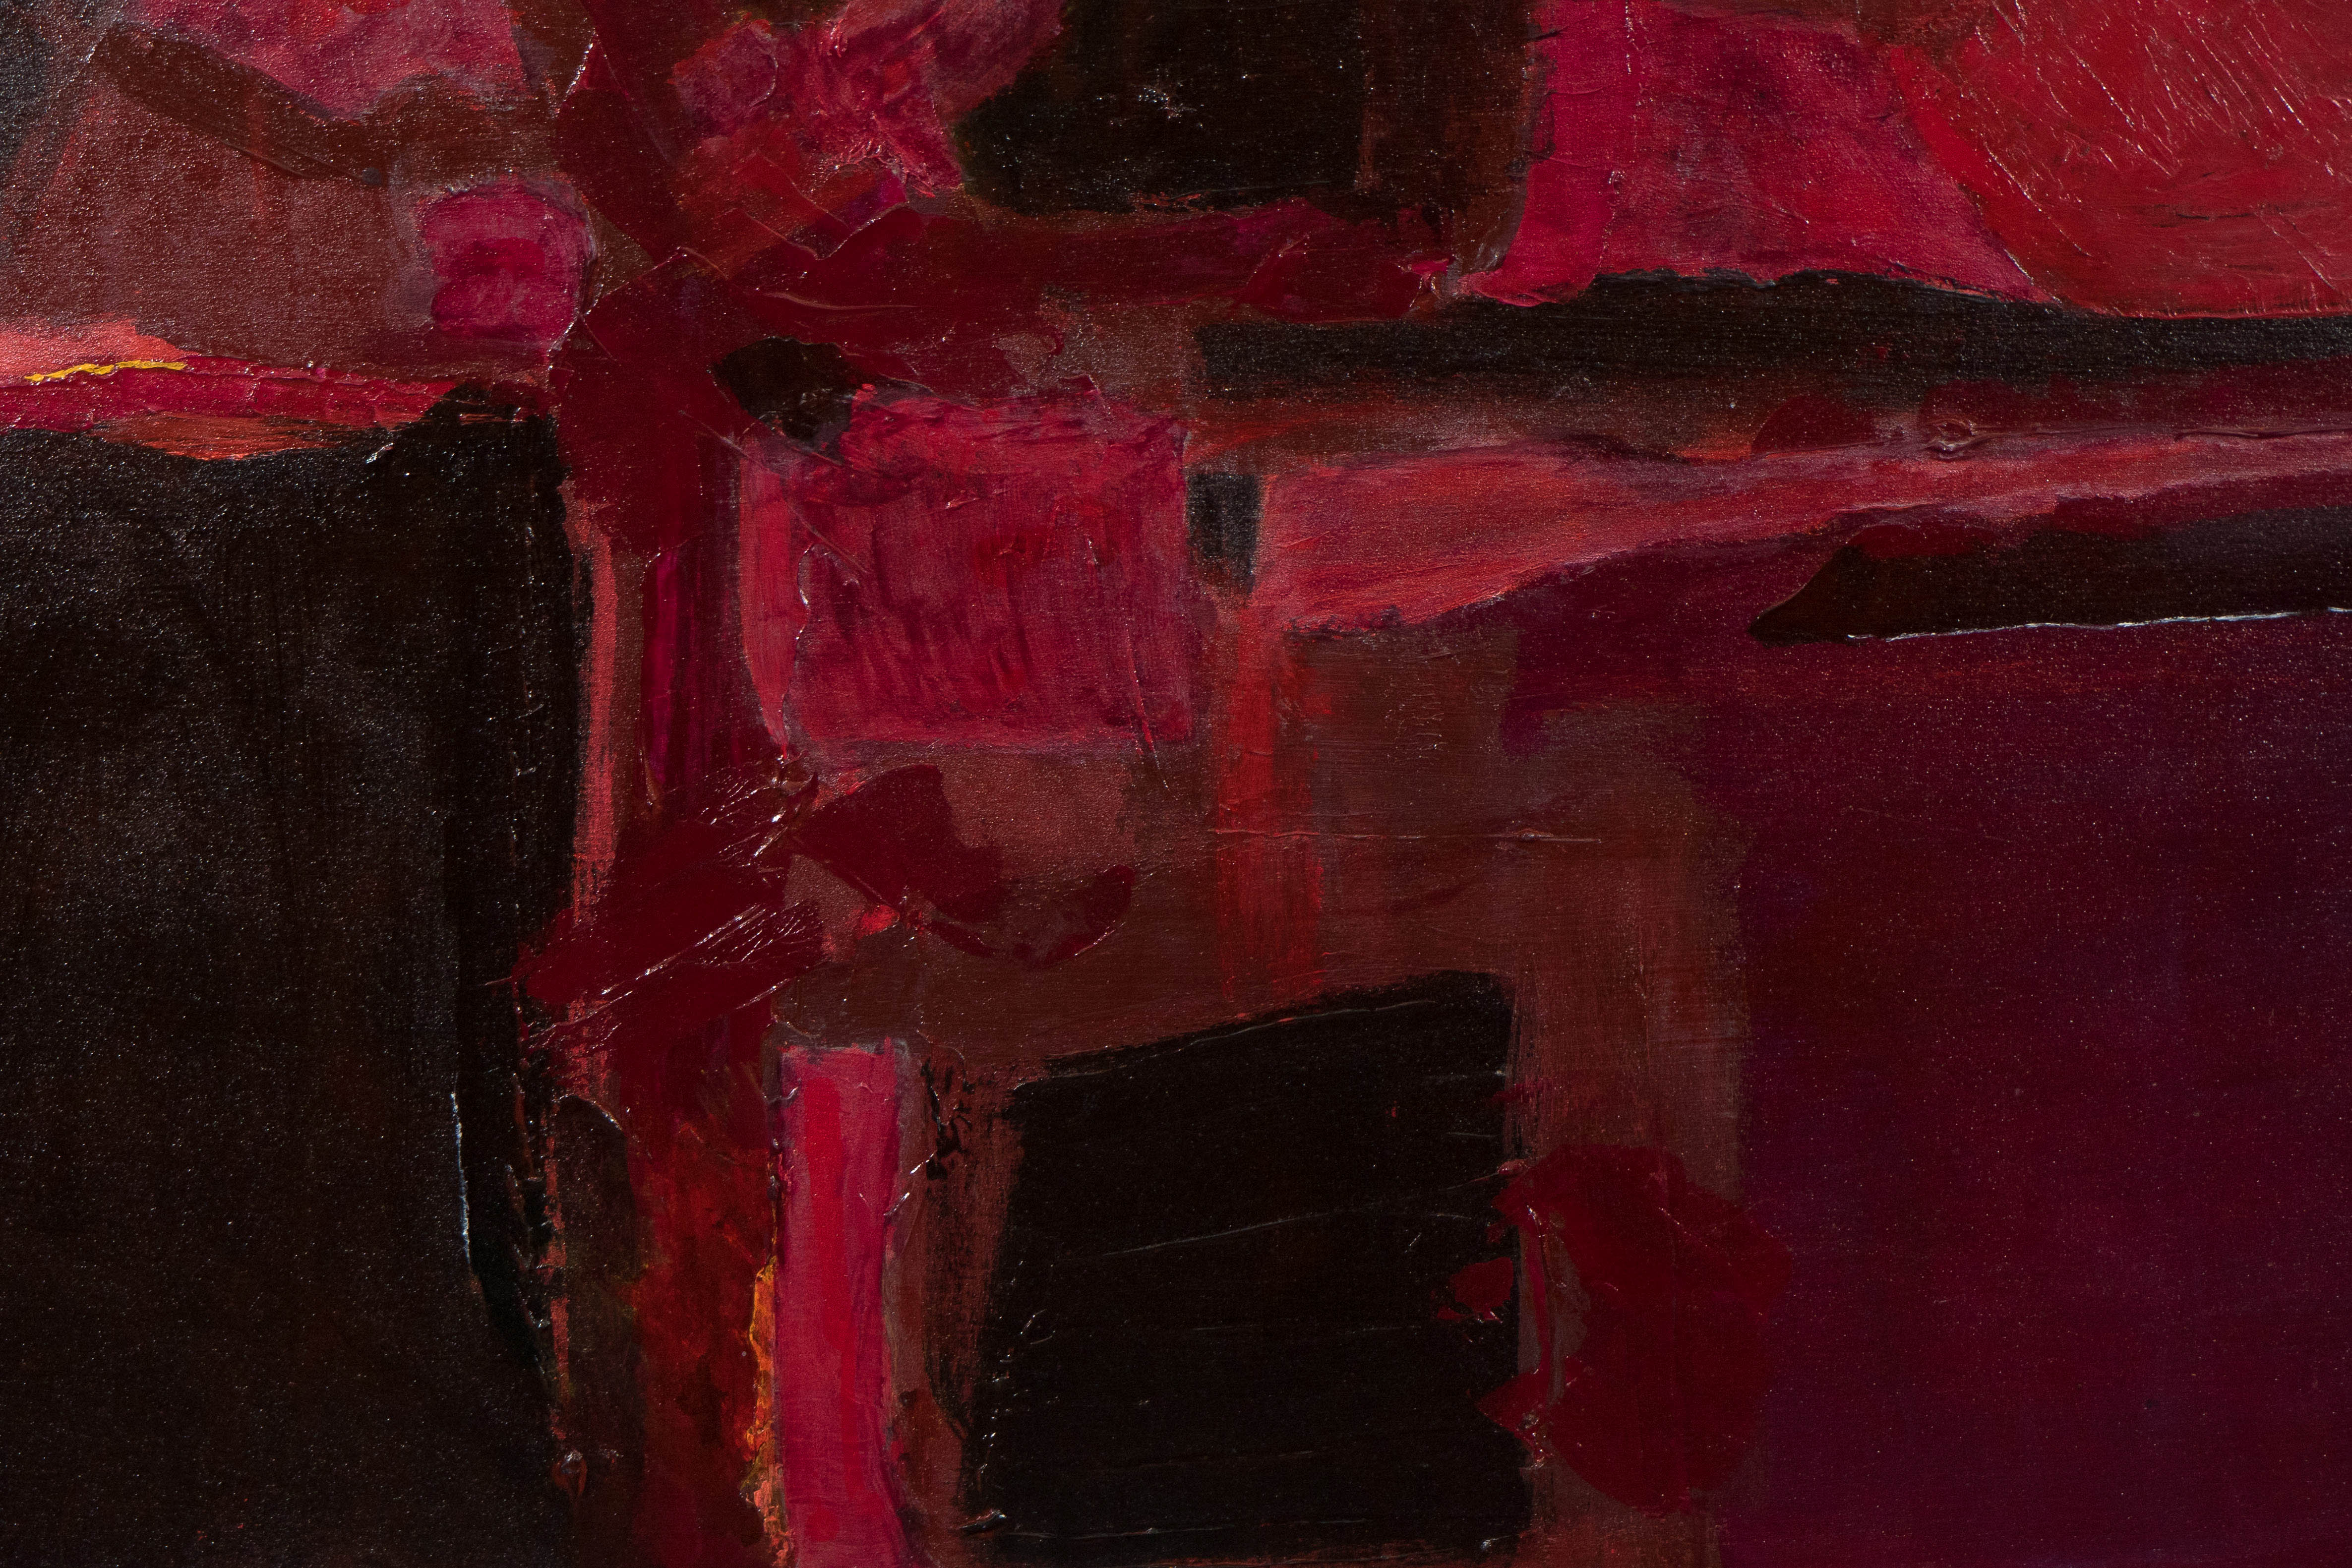 Hand-Painted Abstract Expressionist Painting in Tones of Red